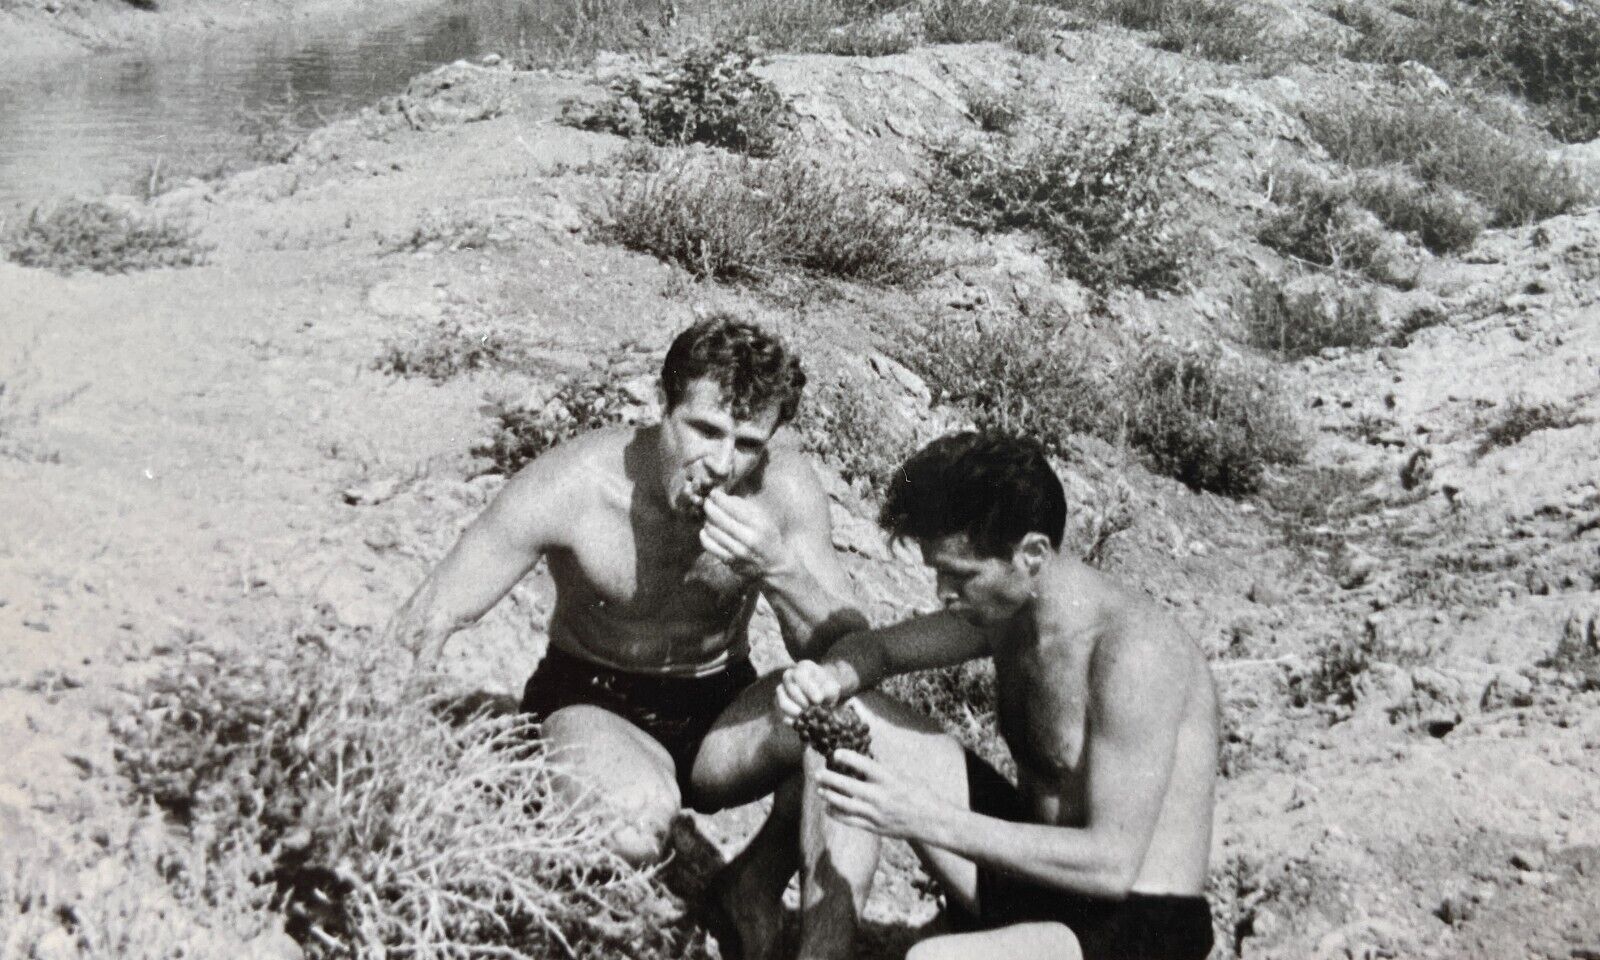 Shirtless Couple Men Handsome Affectionate Young Guys Gay Interest Vintage Photo